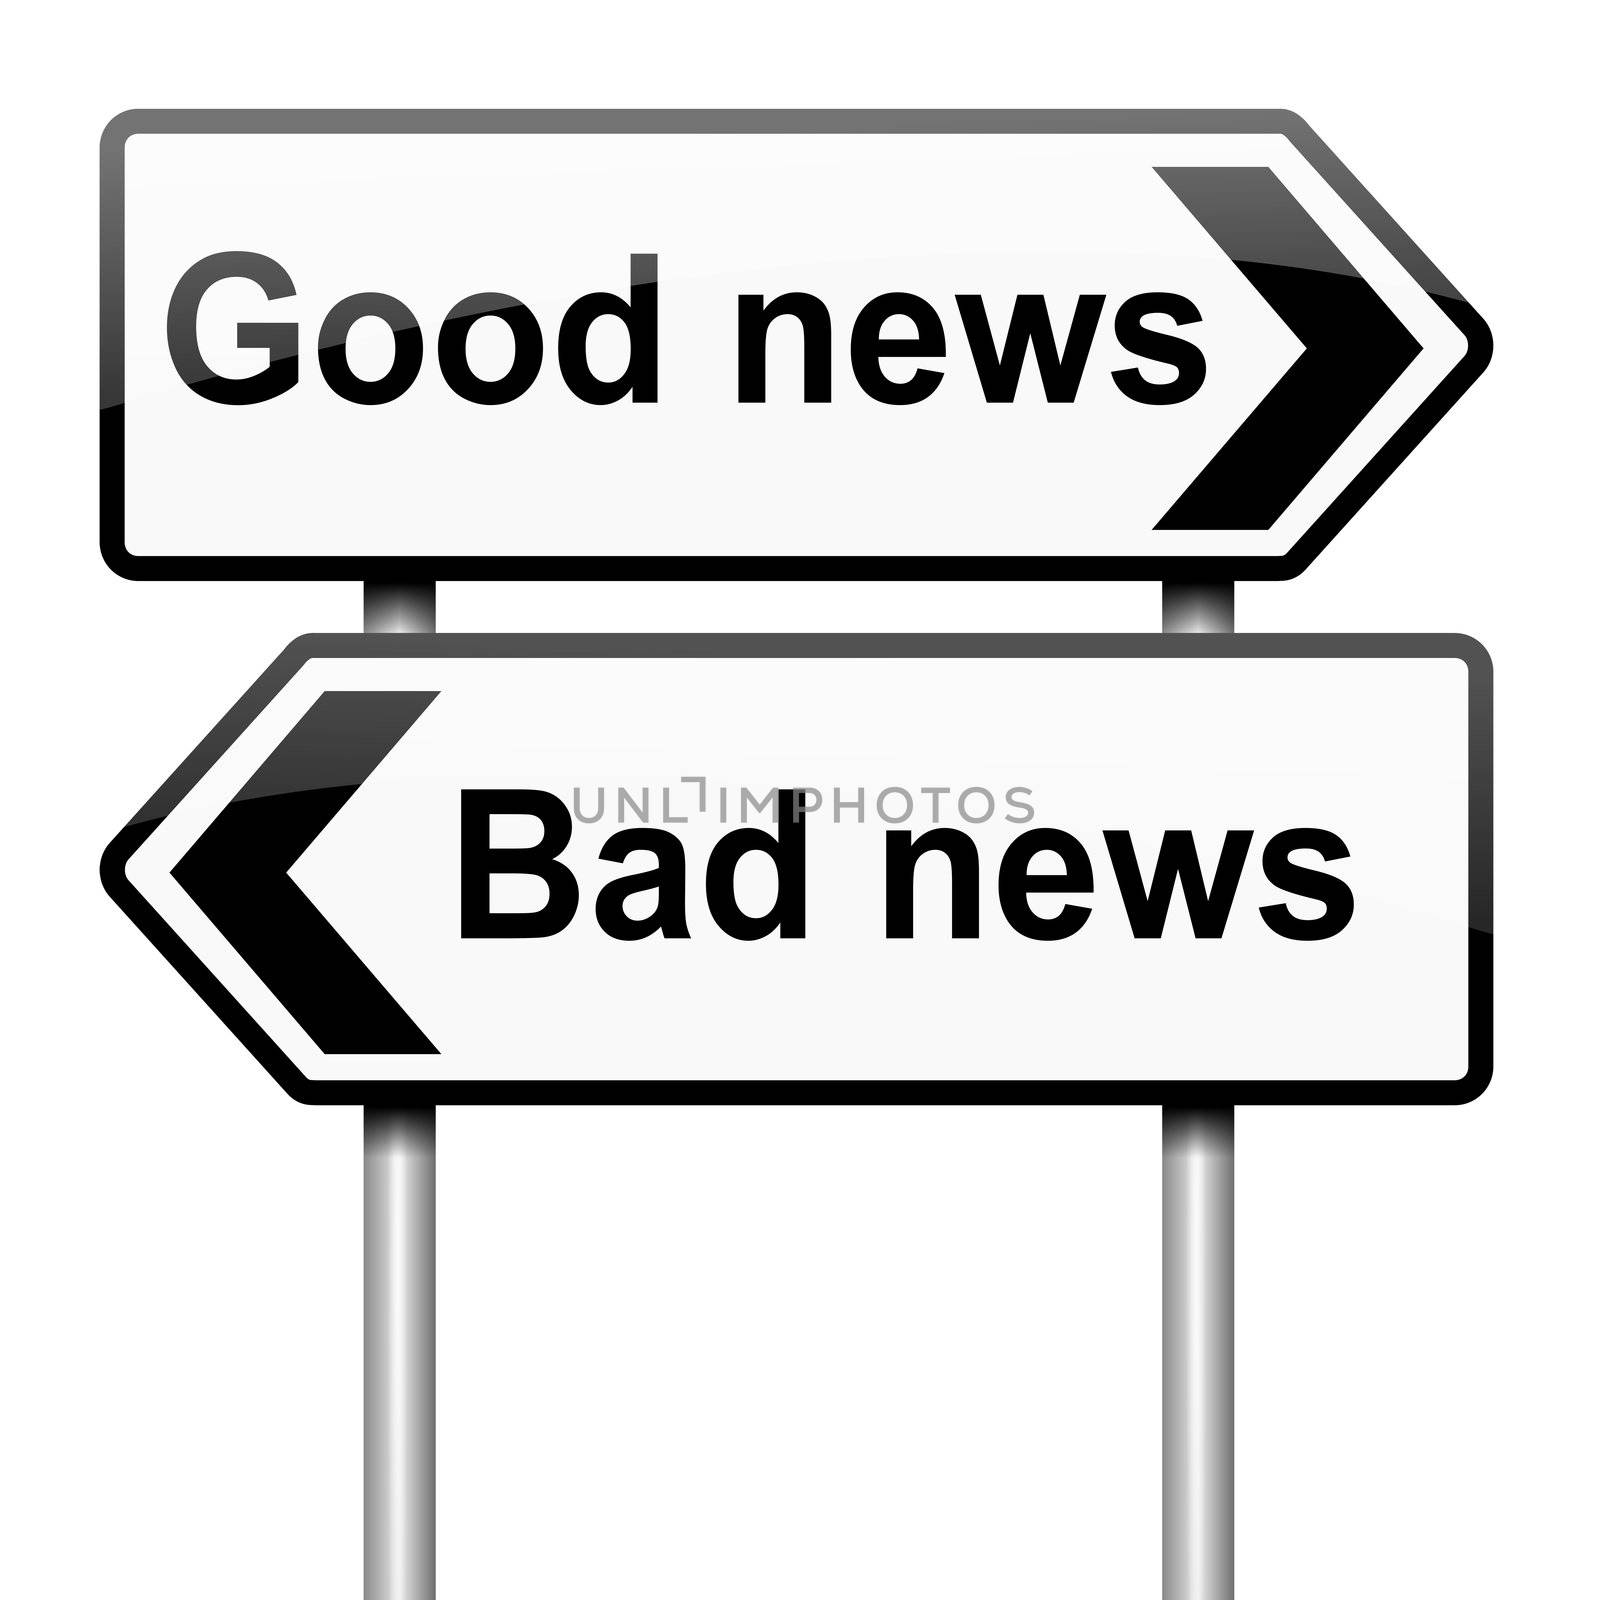 Illustration depicting roadsigns with a news concept. White background.